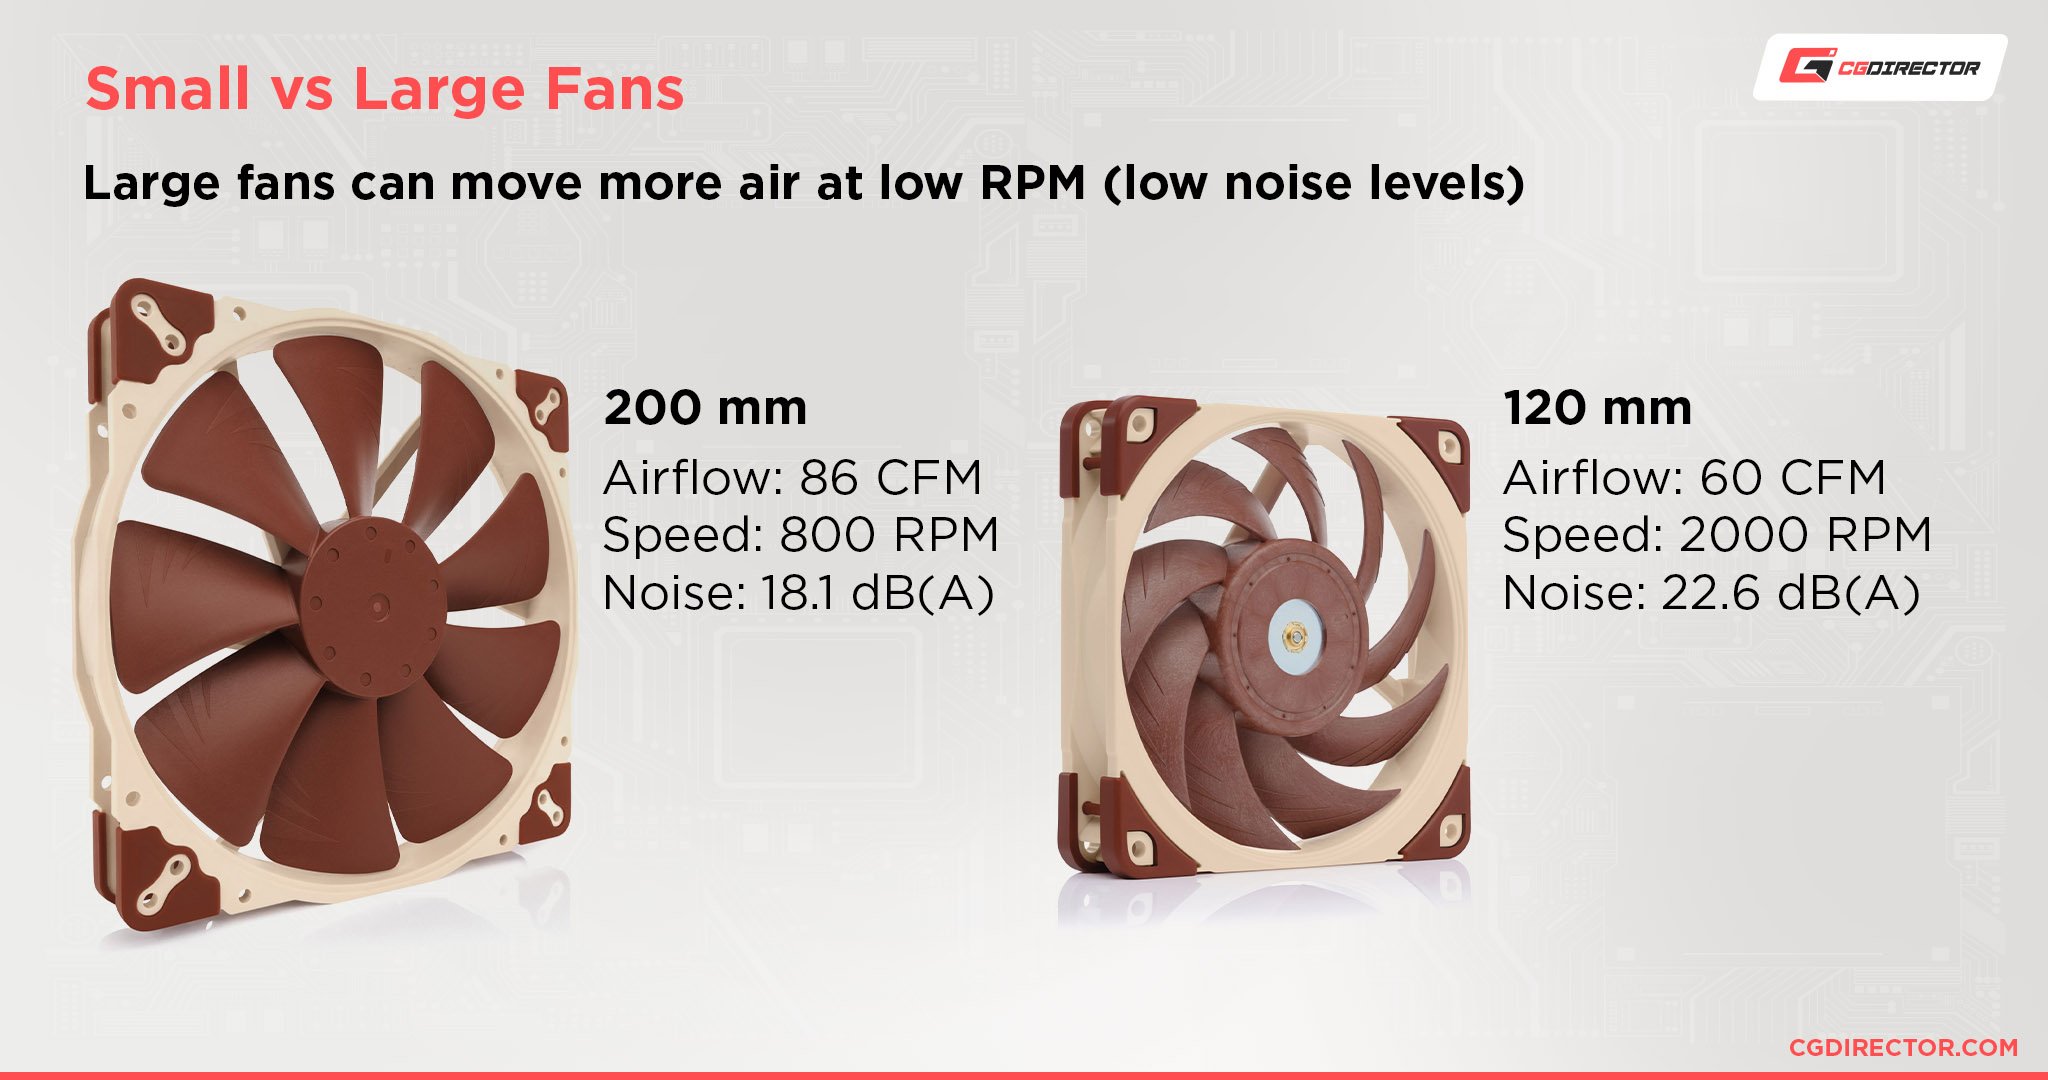 Small vs Large Fans